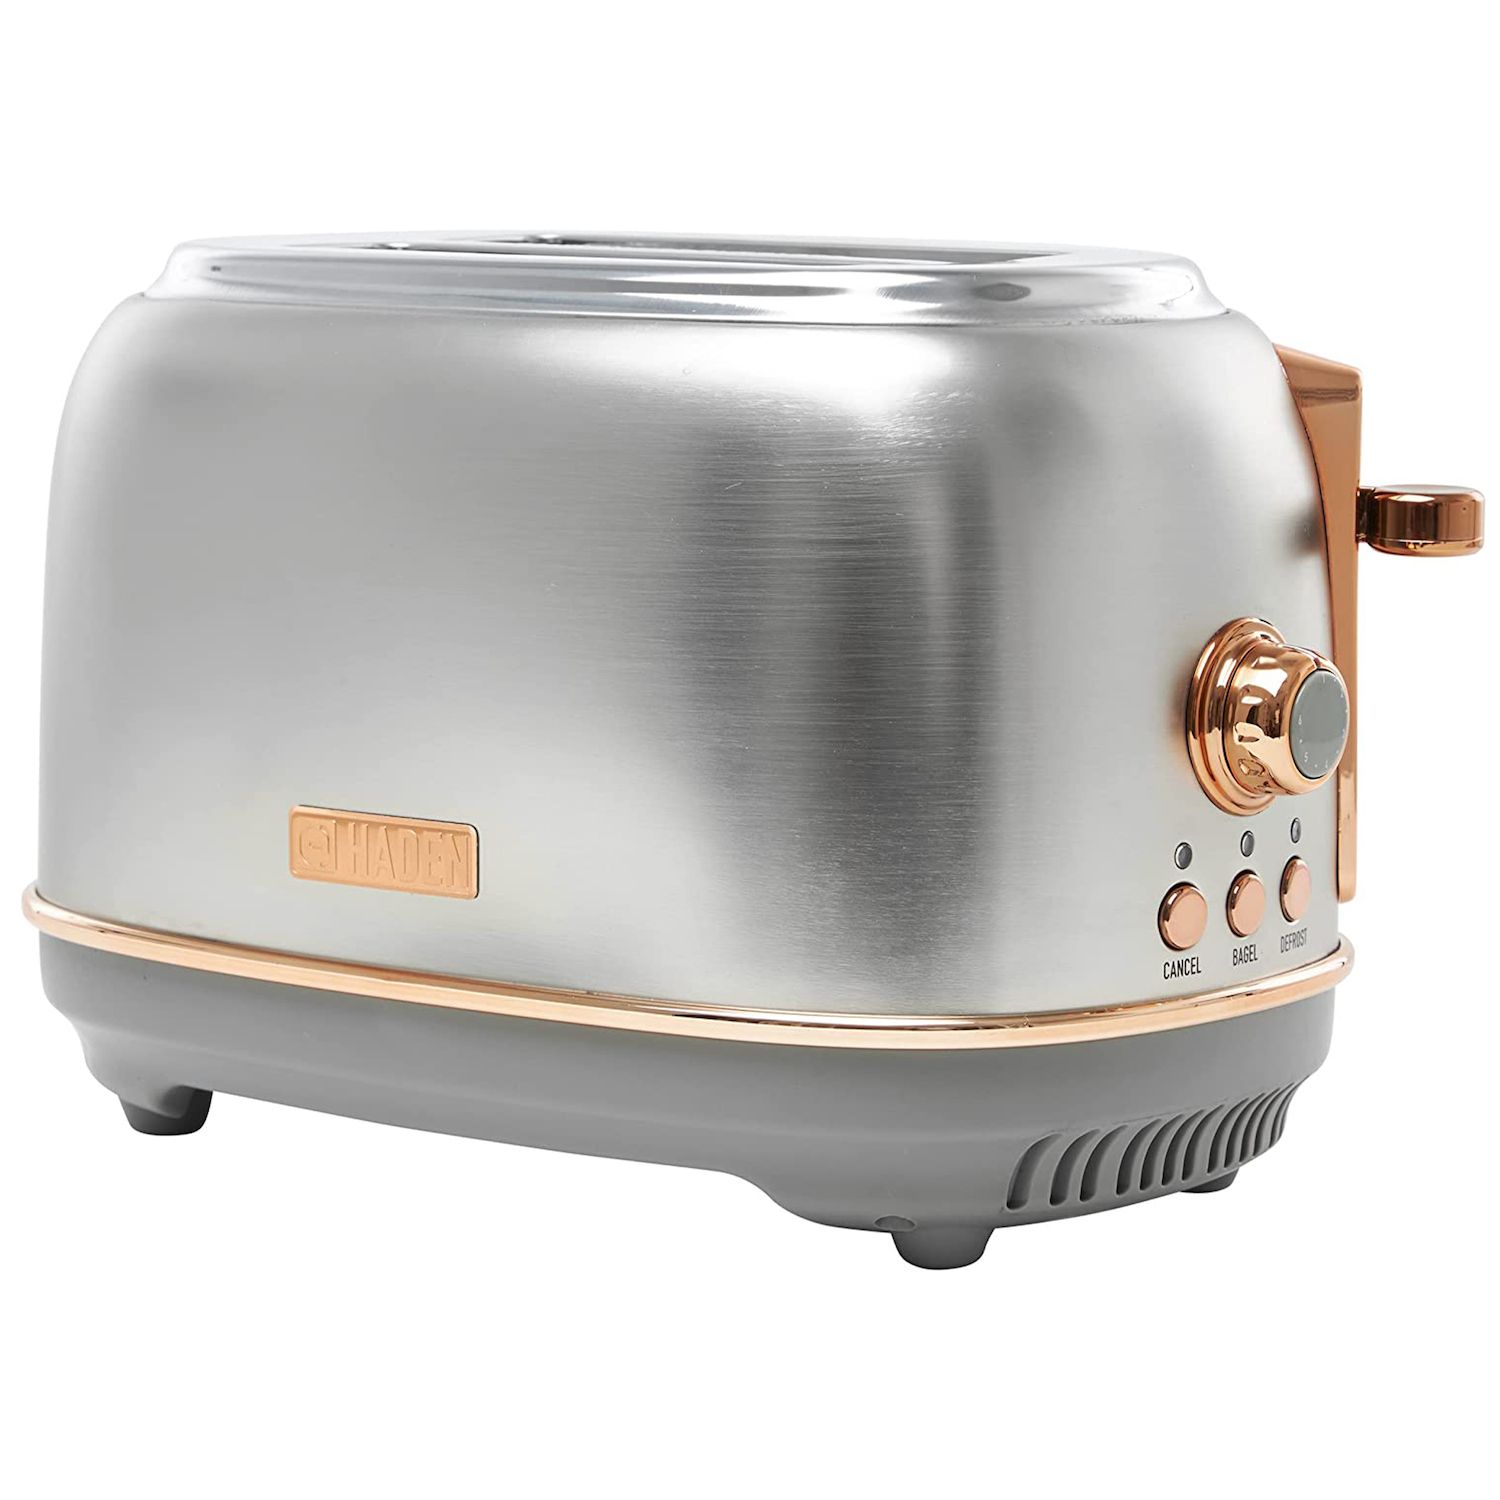 Haden Heritage 4-Slice Wide Slot Stainless Steel Body Retro Toaster,  Turquoise